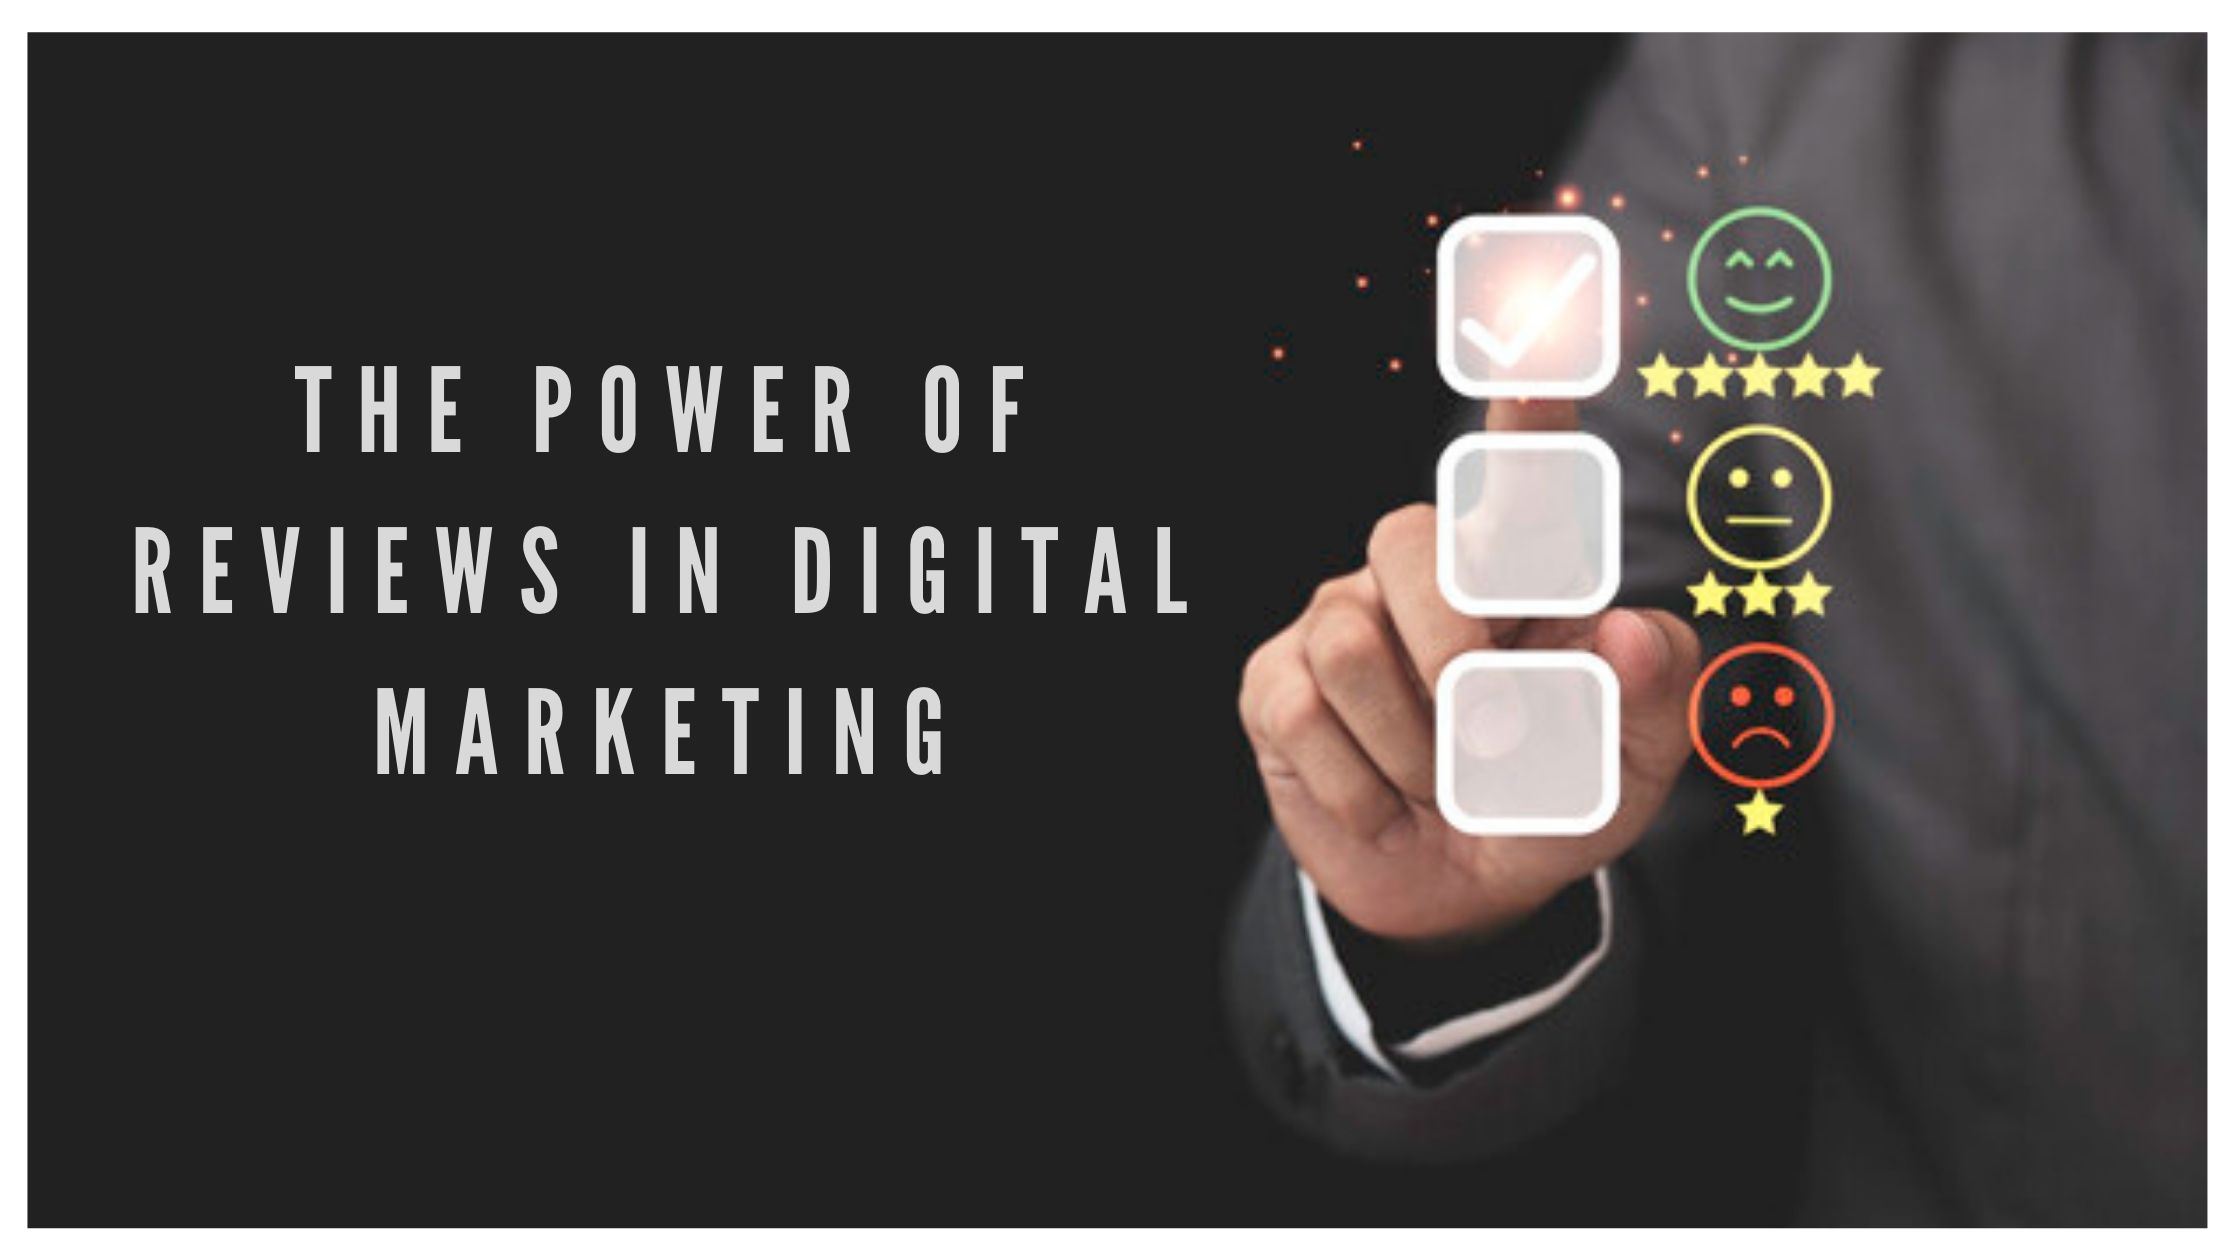 Top 4 Ways to Leverage Digital Marketing in Real Estate - Operatio Marketing  - Your Transparent Digital Marketing Agency